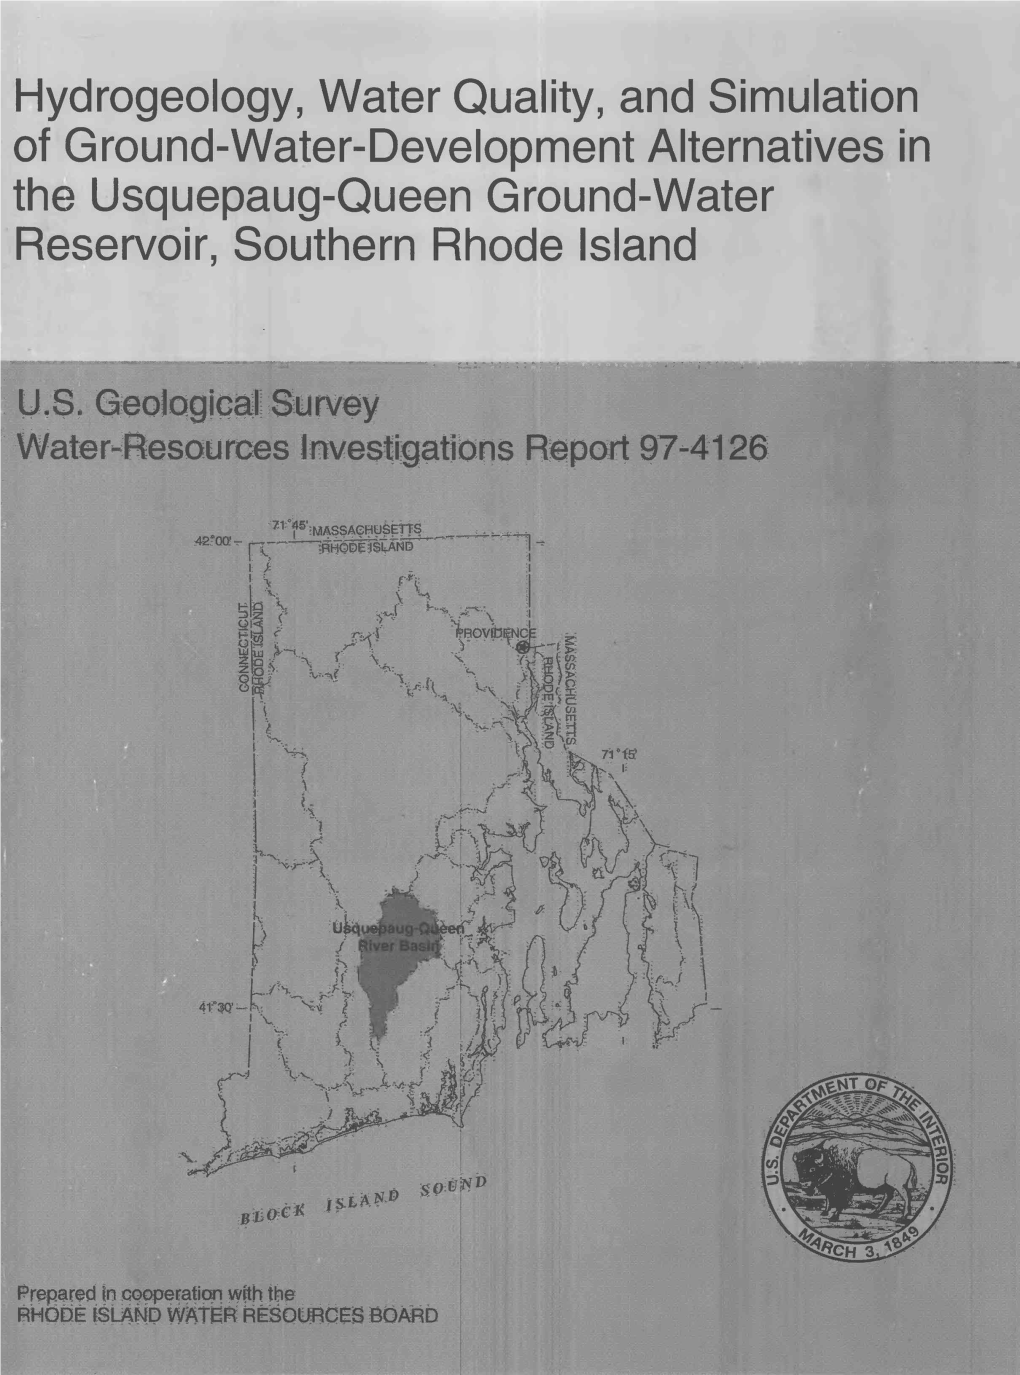 Hydrogeology, Water Quality, and Simulation of Ground-Water-Development Alternatives in the Usquepaug-Queen Ground-Water Reservoir, Southern Rhode Island